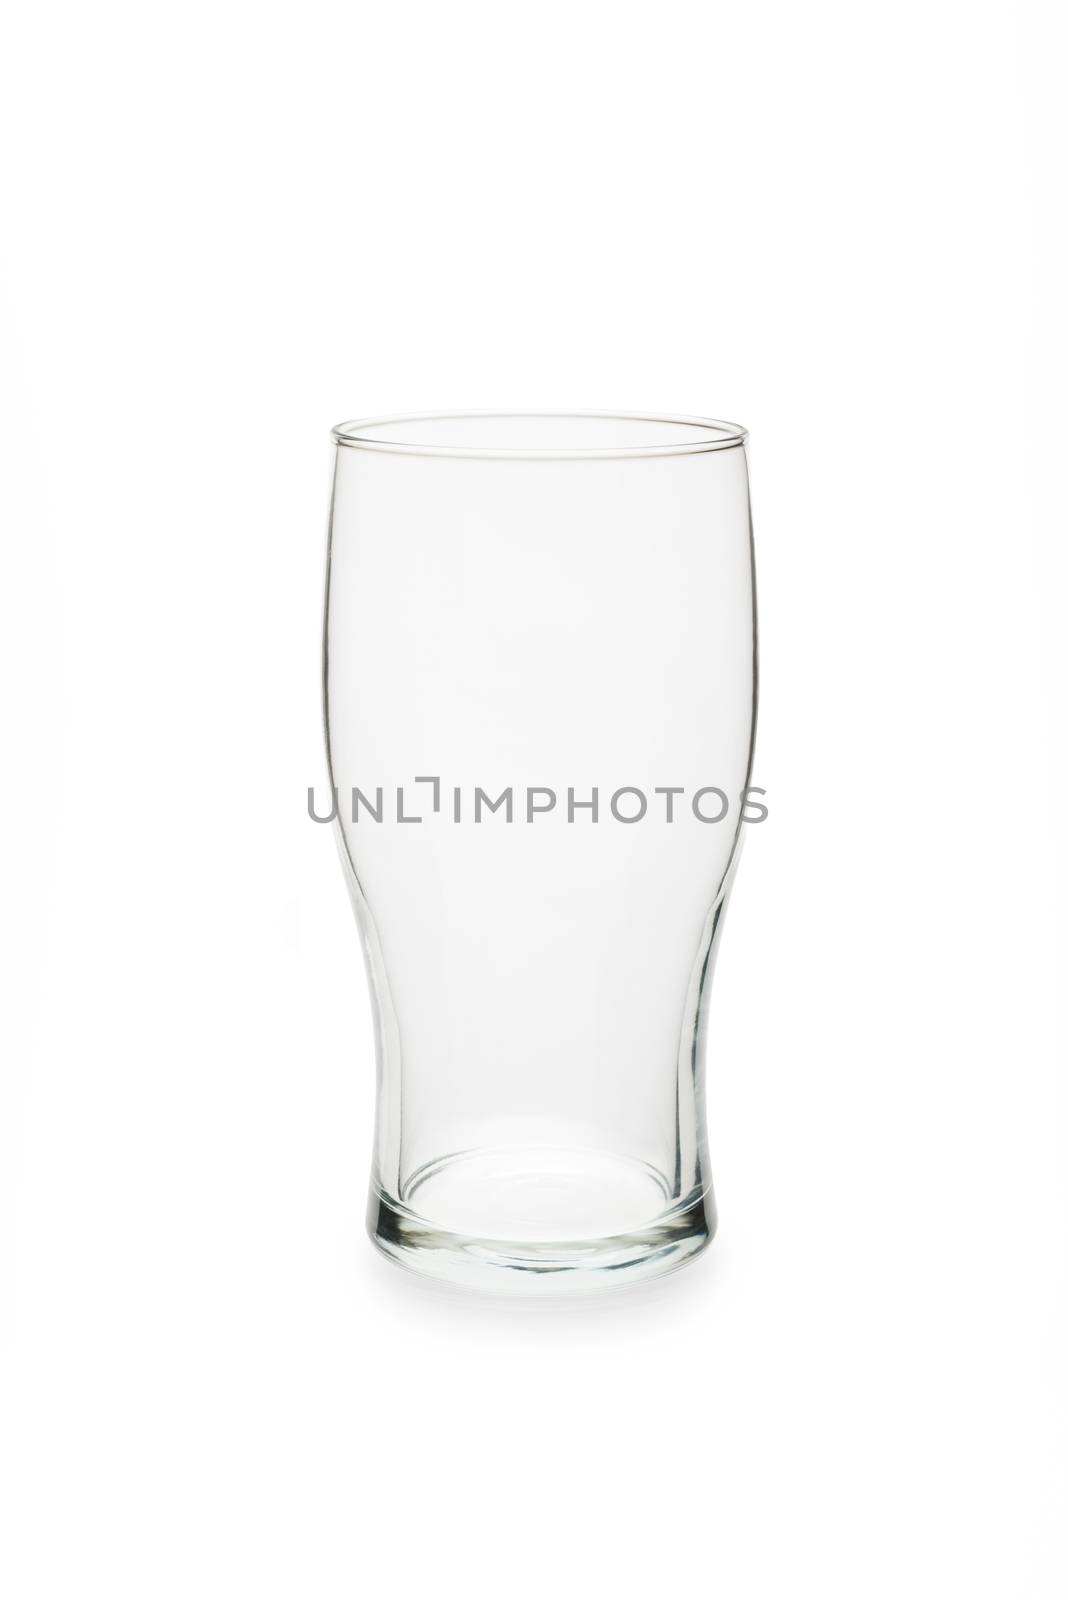 Empty pint glass isolated against white background.